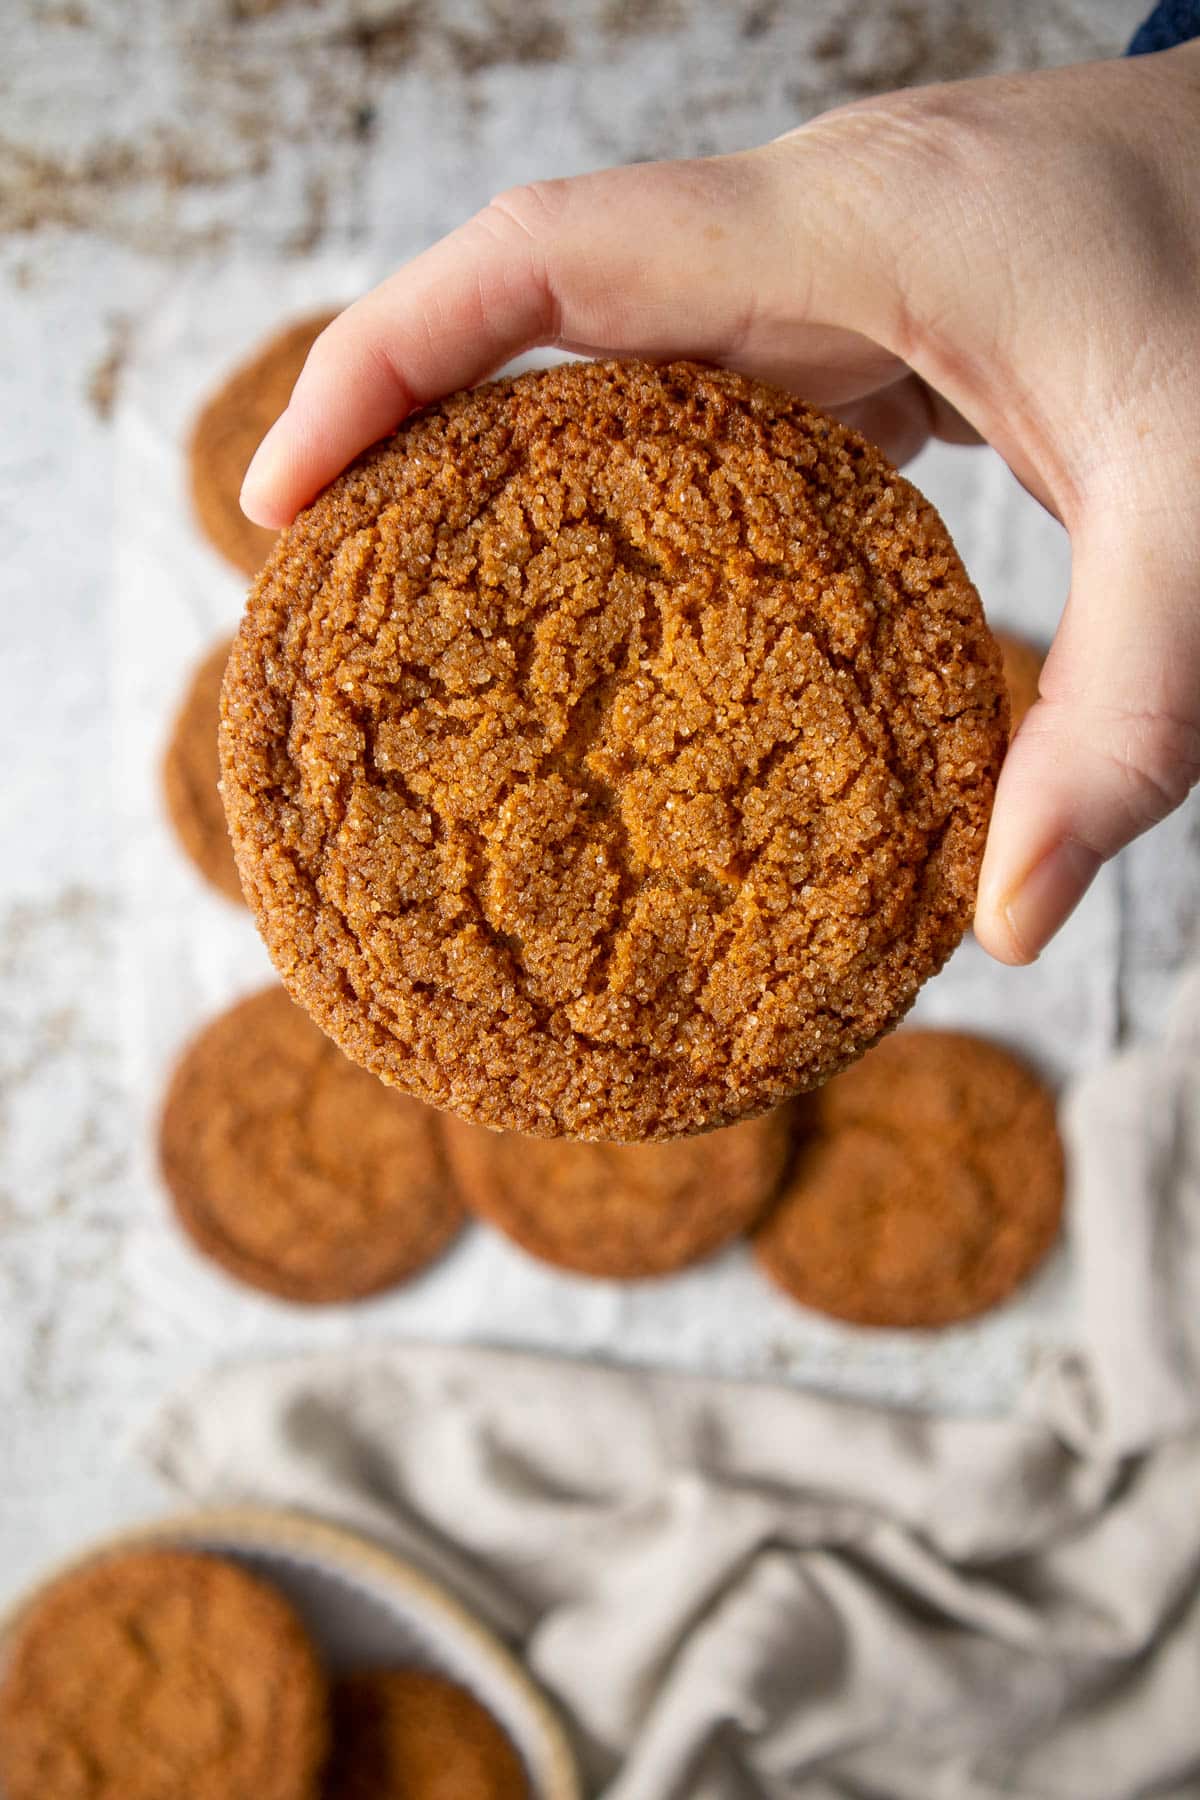 Hand holding a ginger snap.